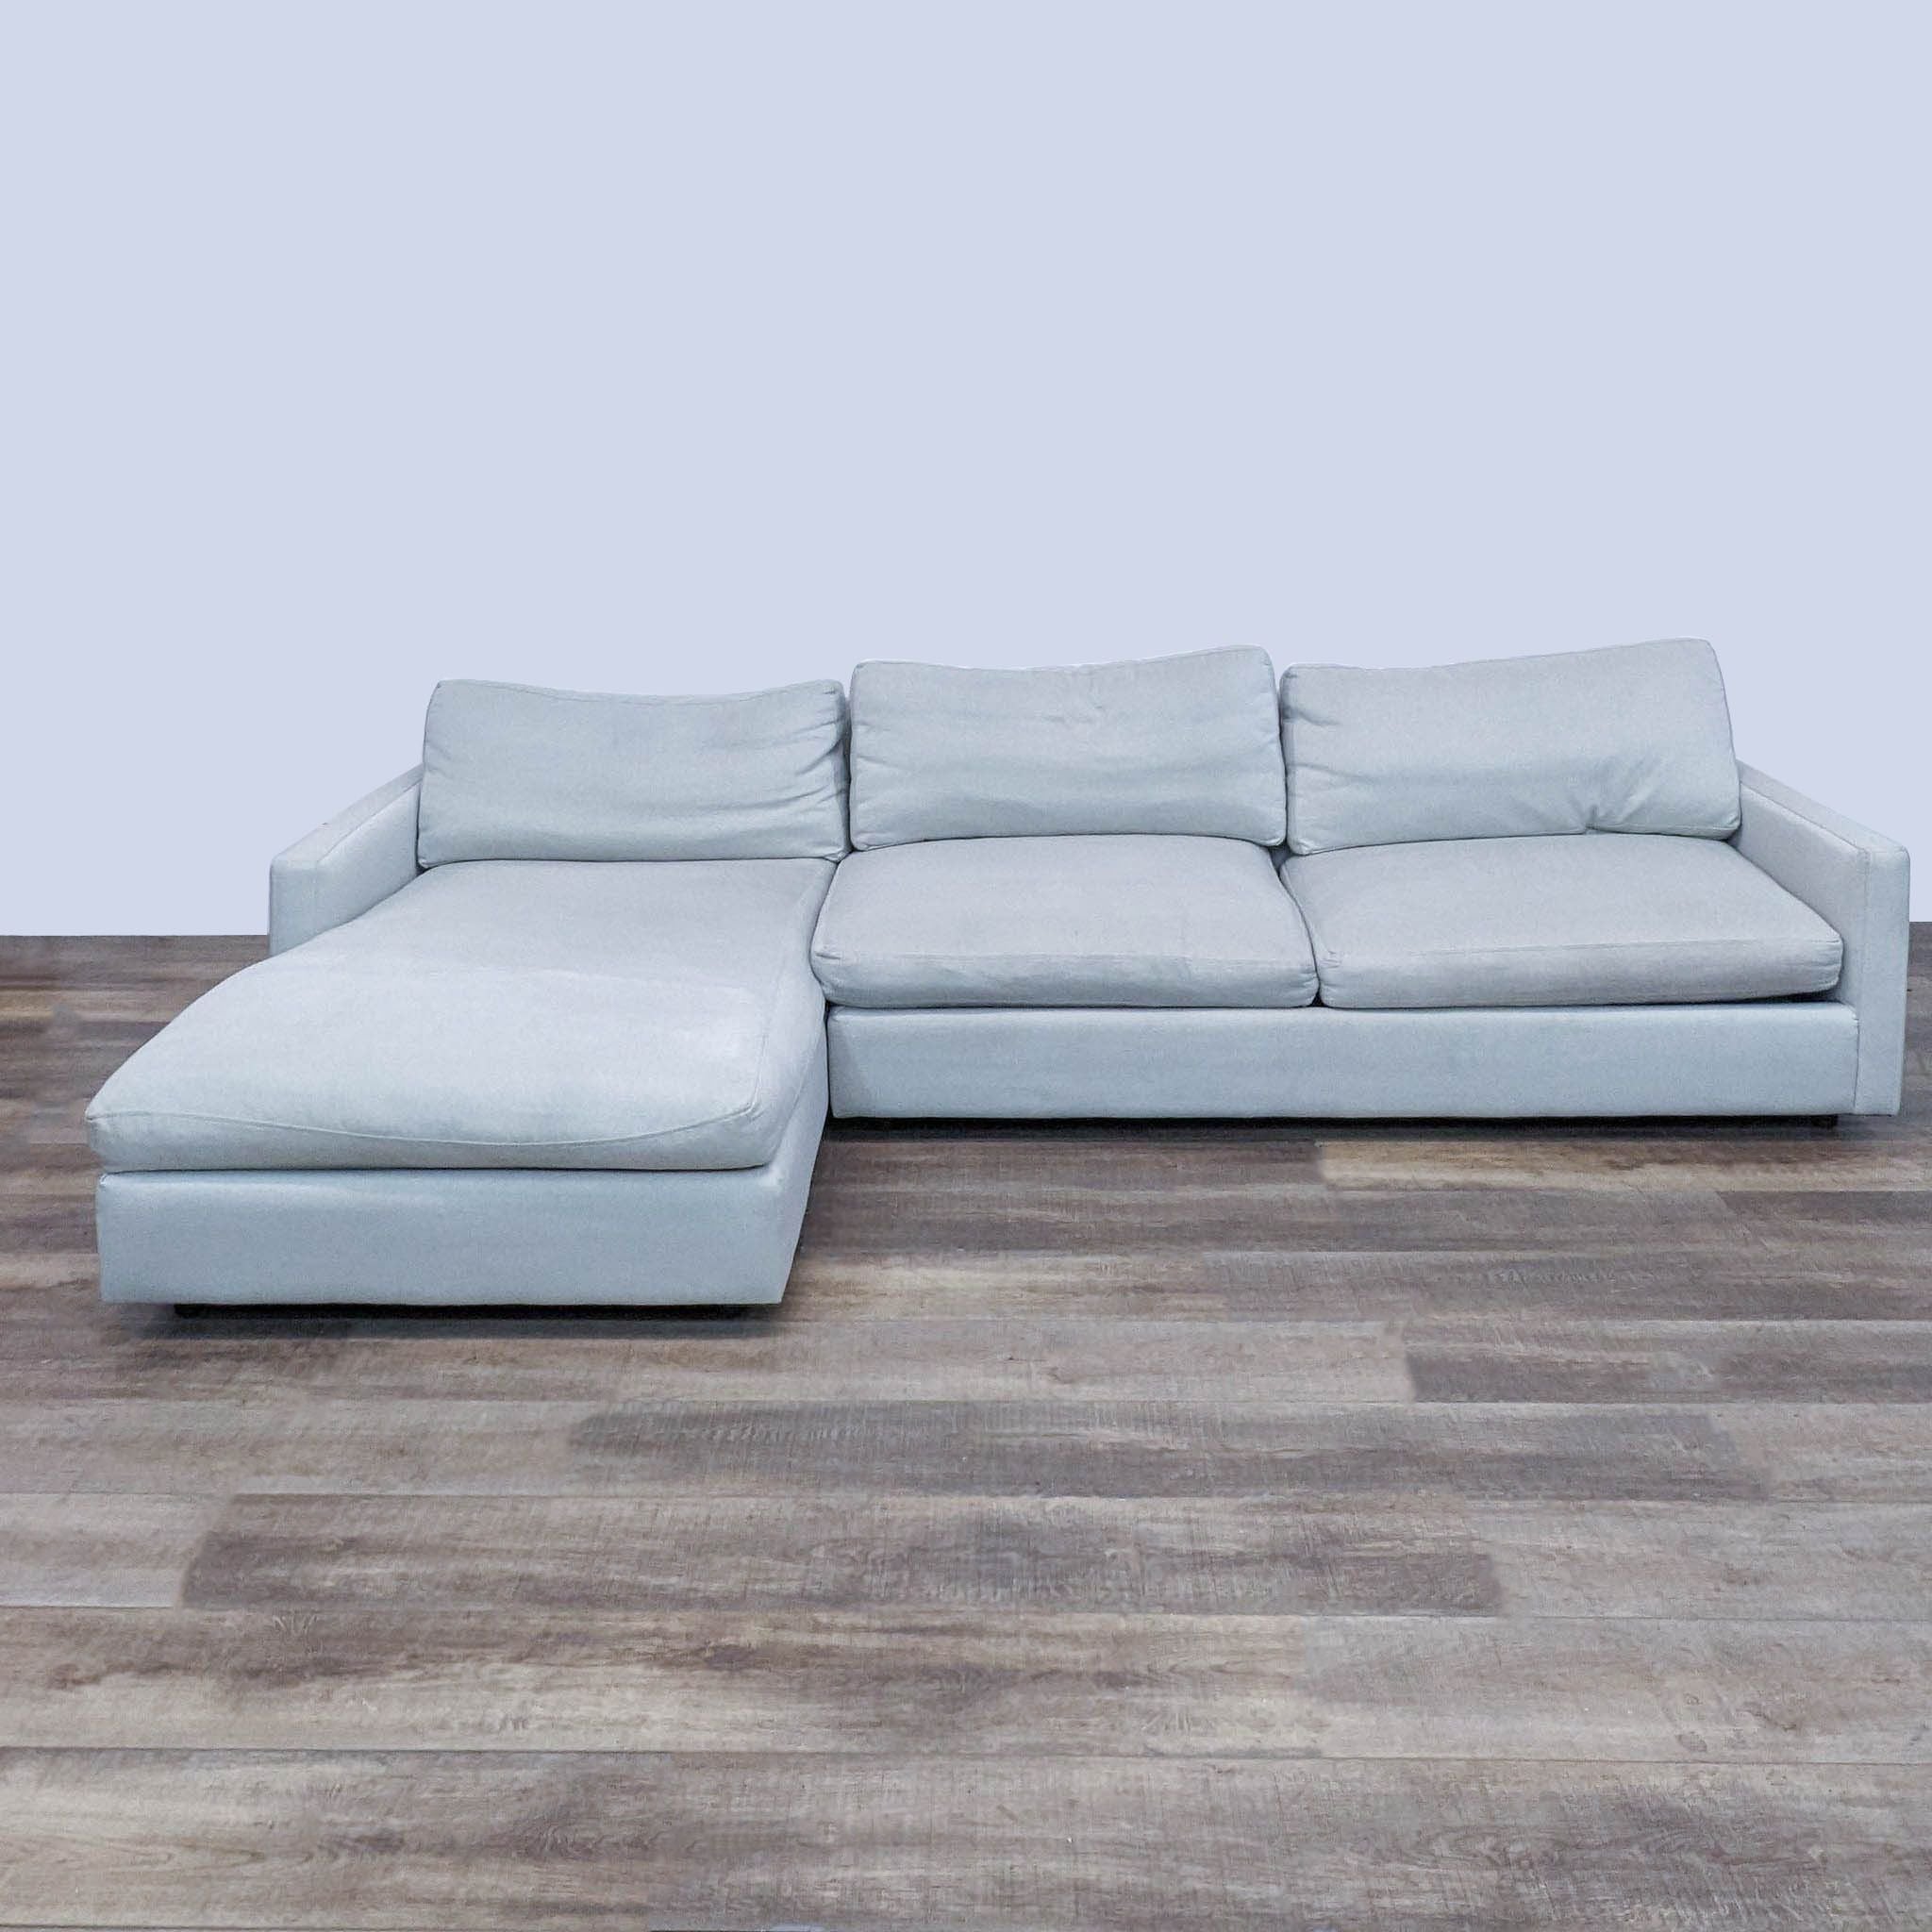 Room & Board sleek sectional in neutral color with chaise and narrow arms, positioned on a wooden floor.